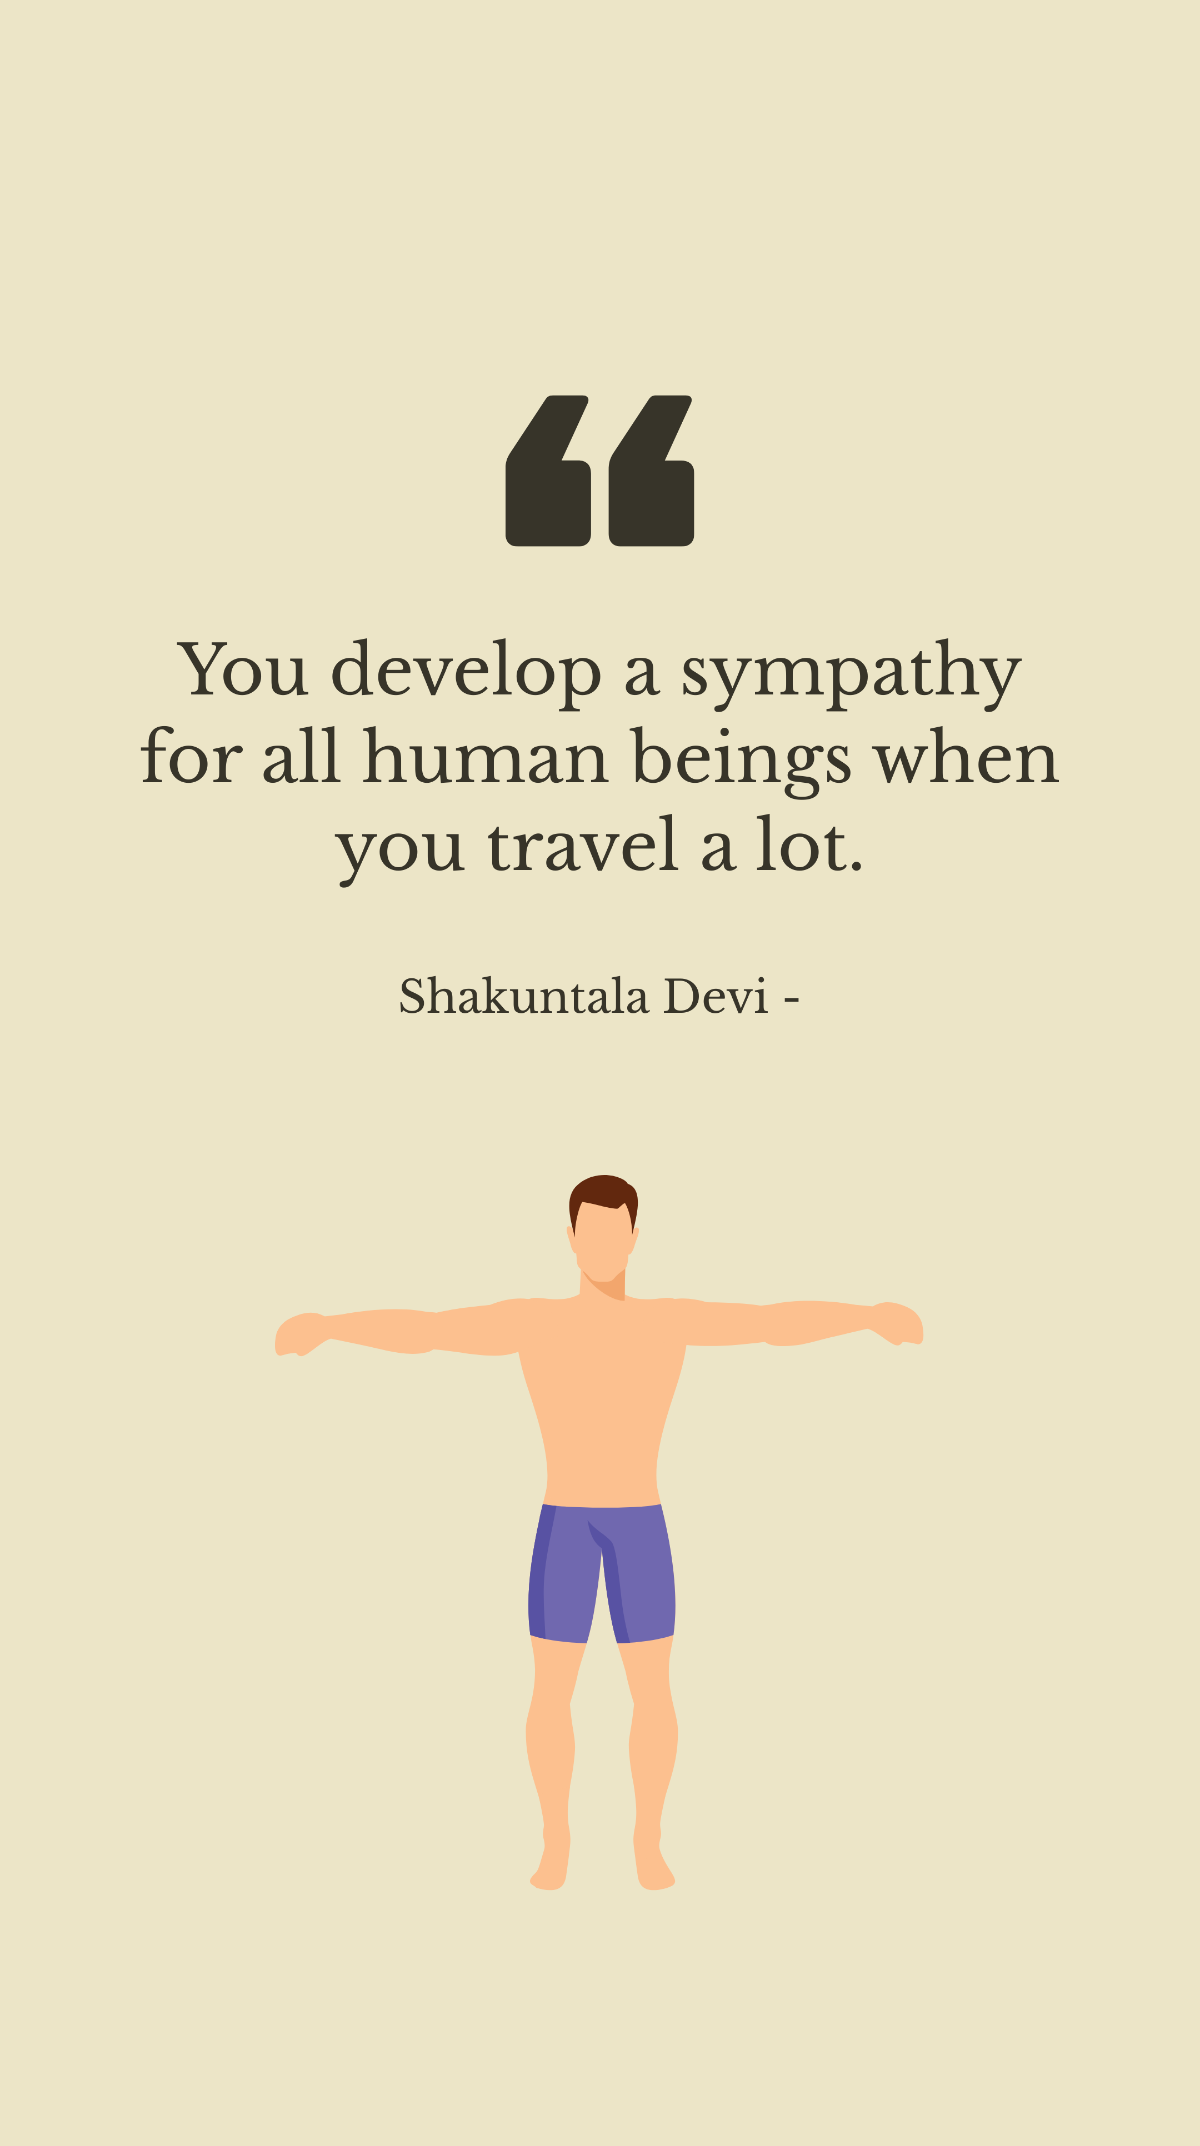 Free Shakuntala Devi - You develop a sympathy for all human beings when you travel a lot. Template